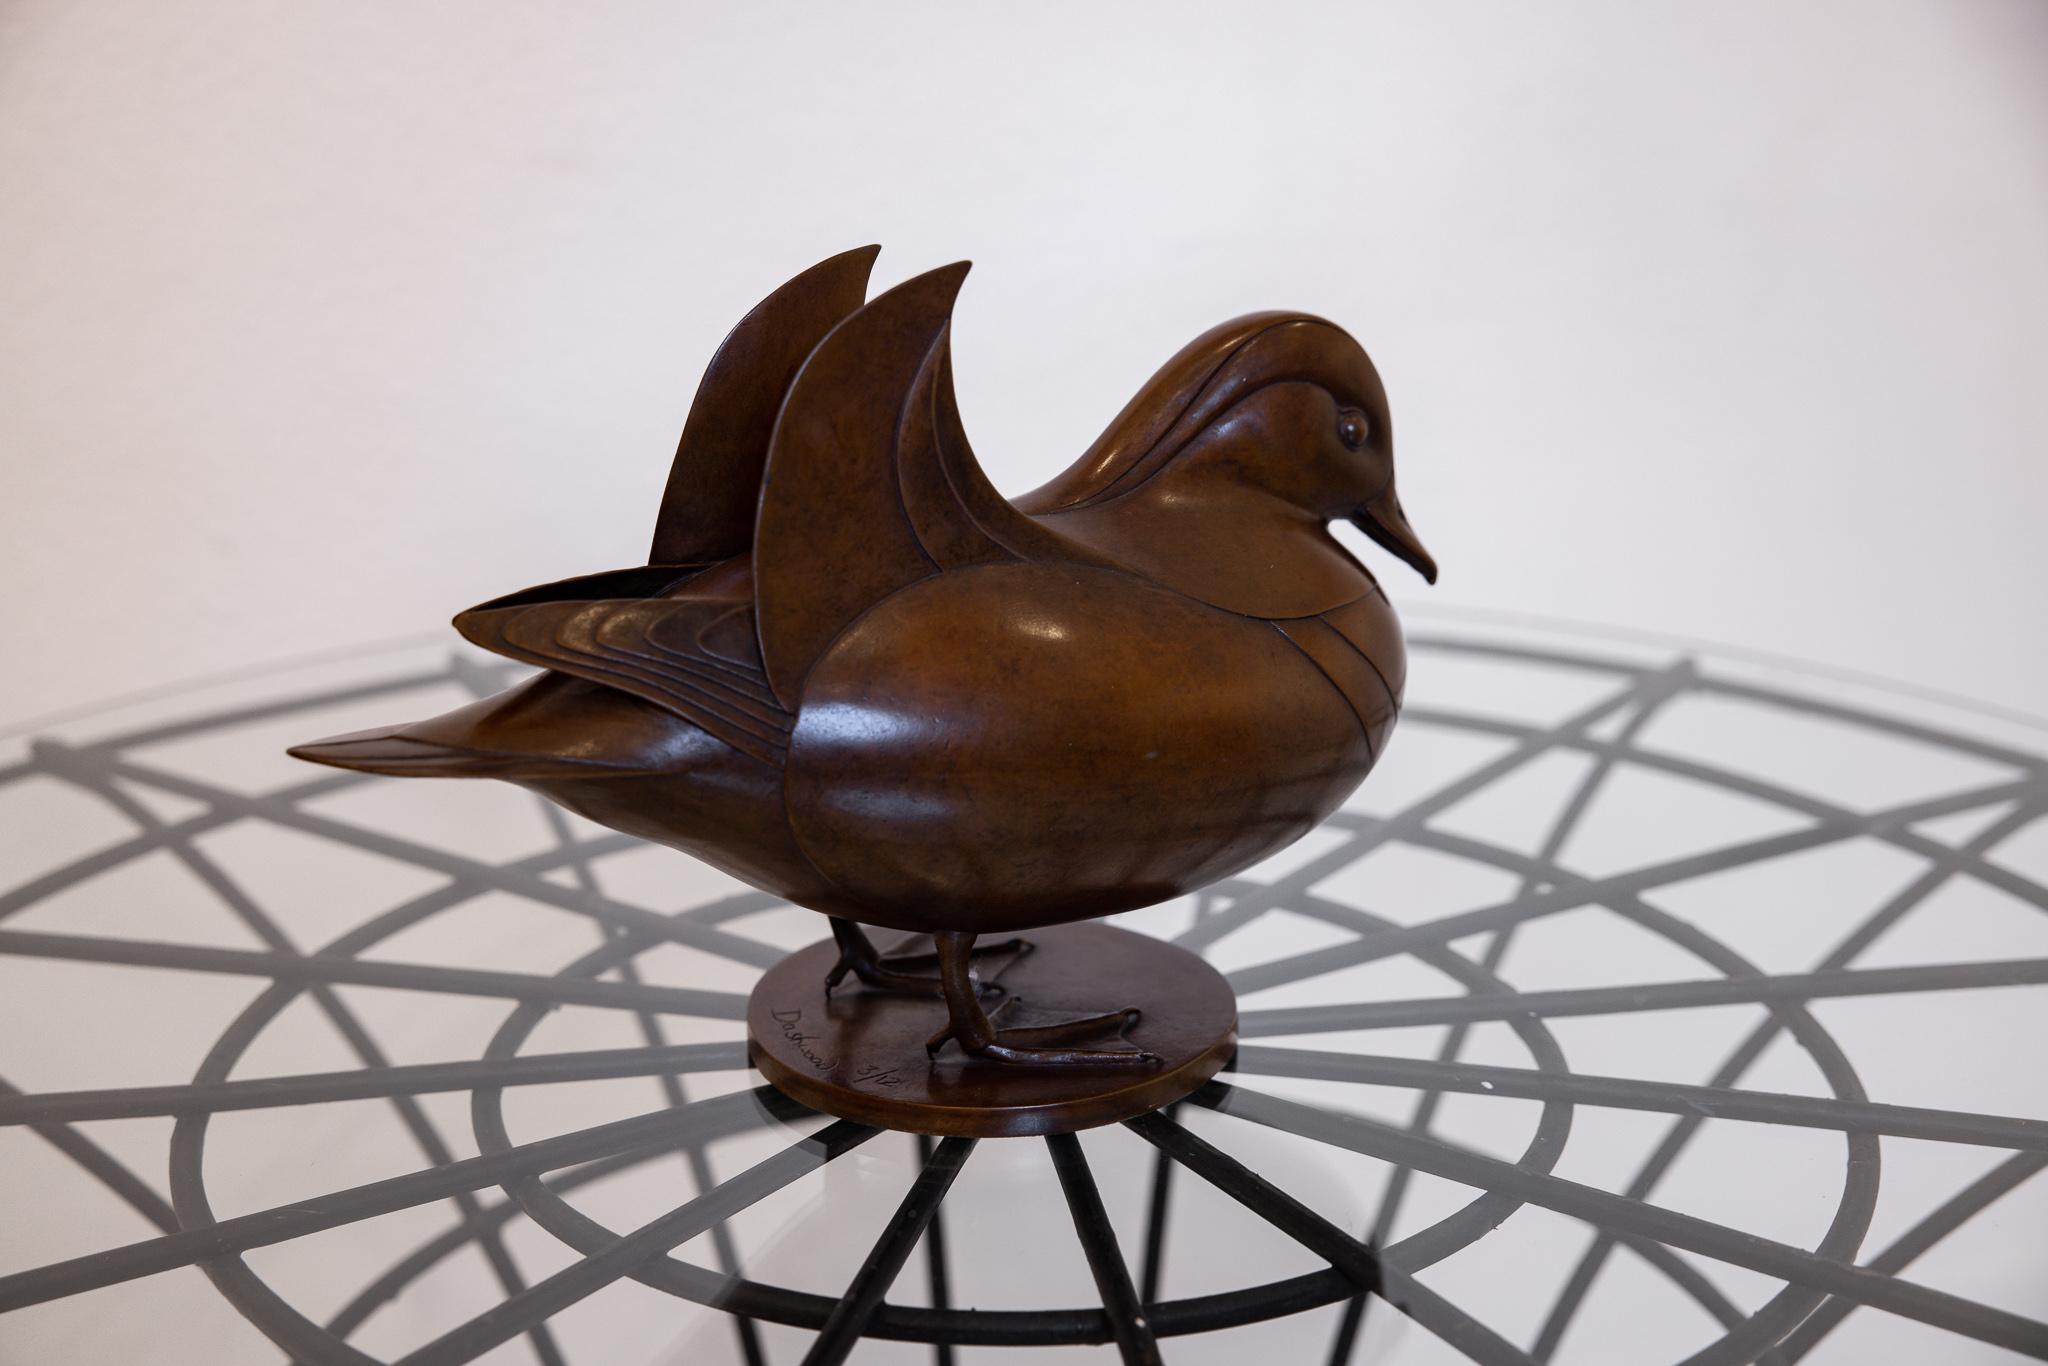 This is an excellent bronze stylized sculpture of a Mandarin Duck by Geoffrey Dashwood. Known for his use of simplicity, smooth surfaces, and continuous curved forms, this sculpture is an excellent representation of his work. Devoid of 